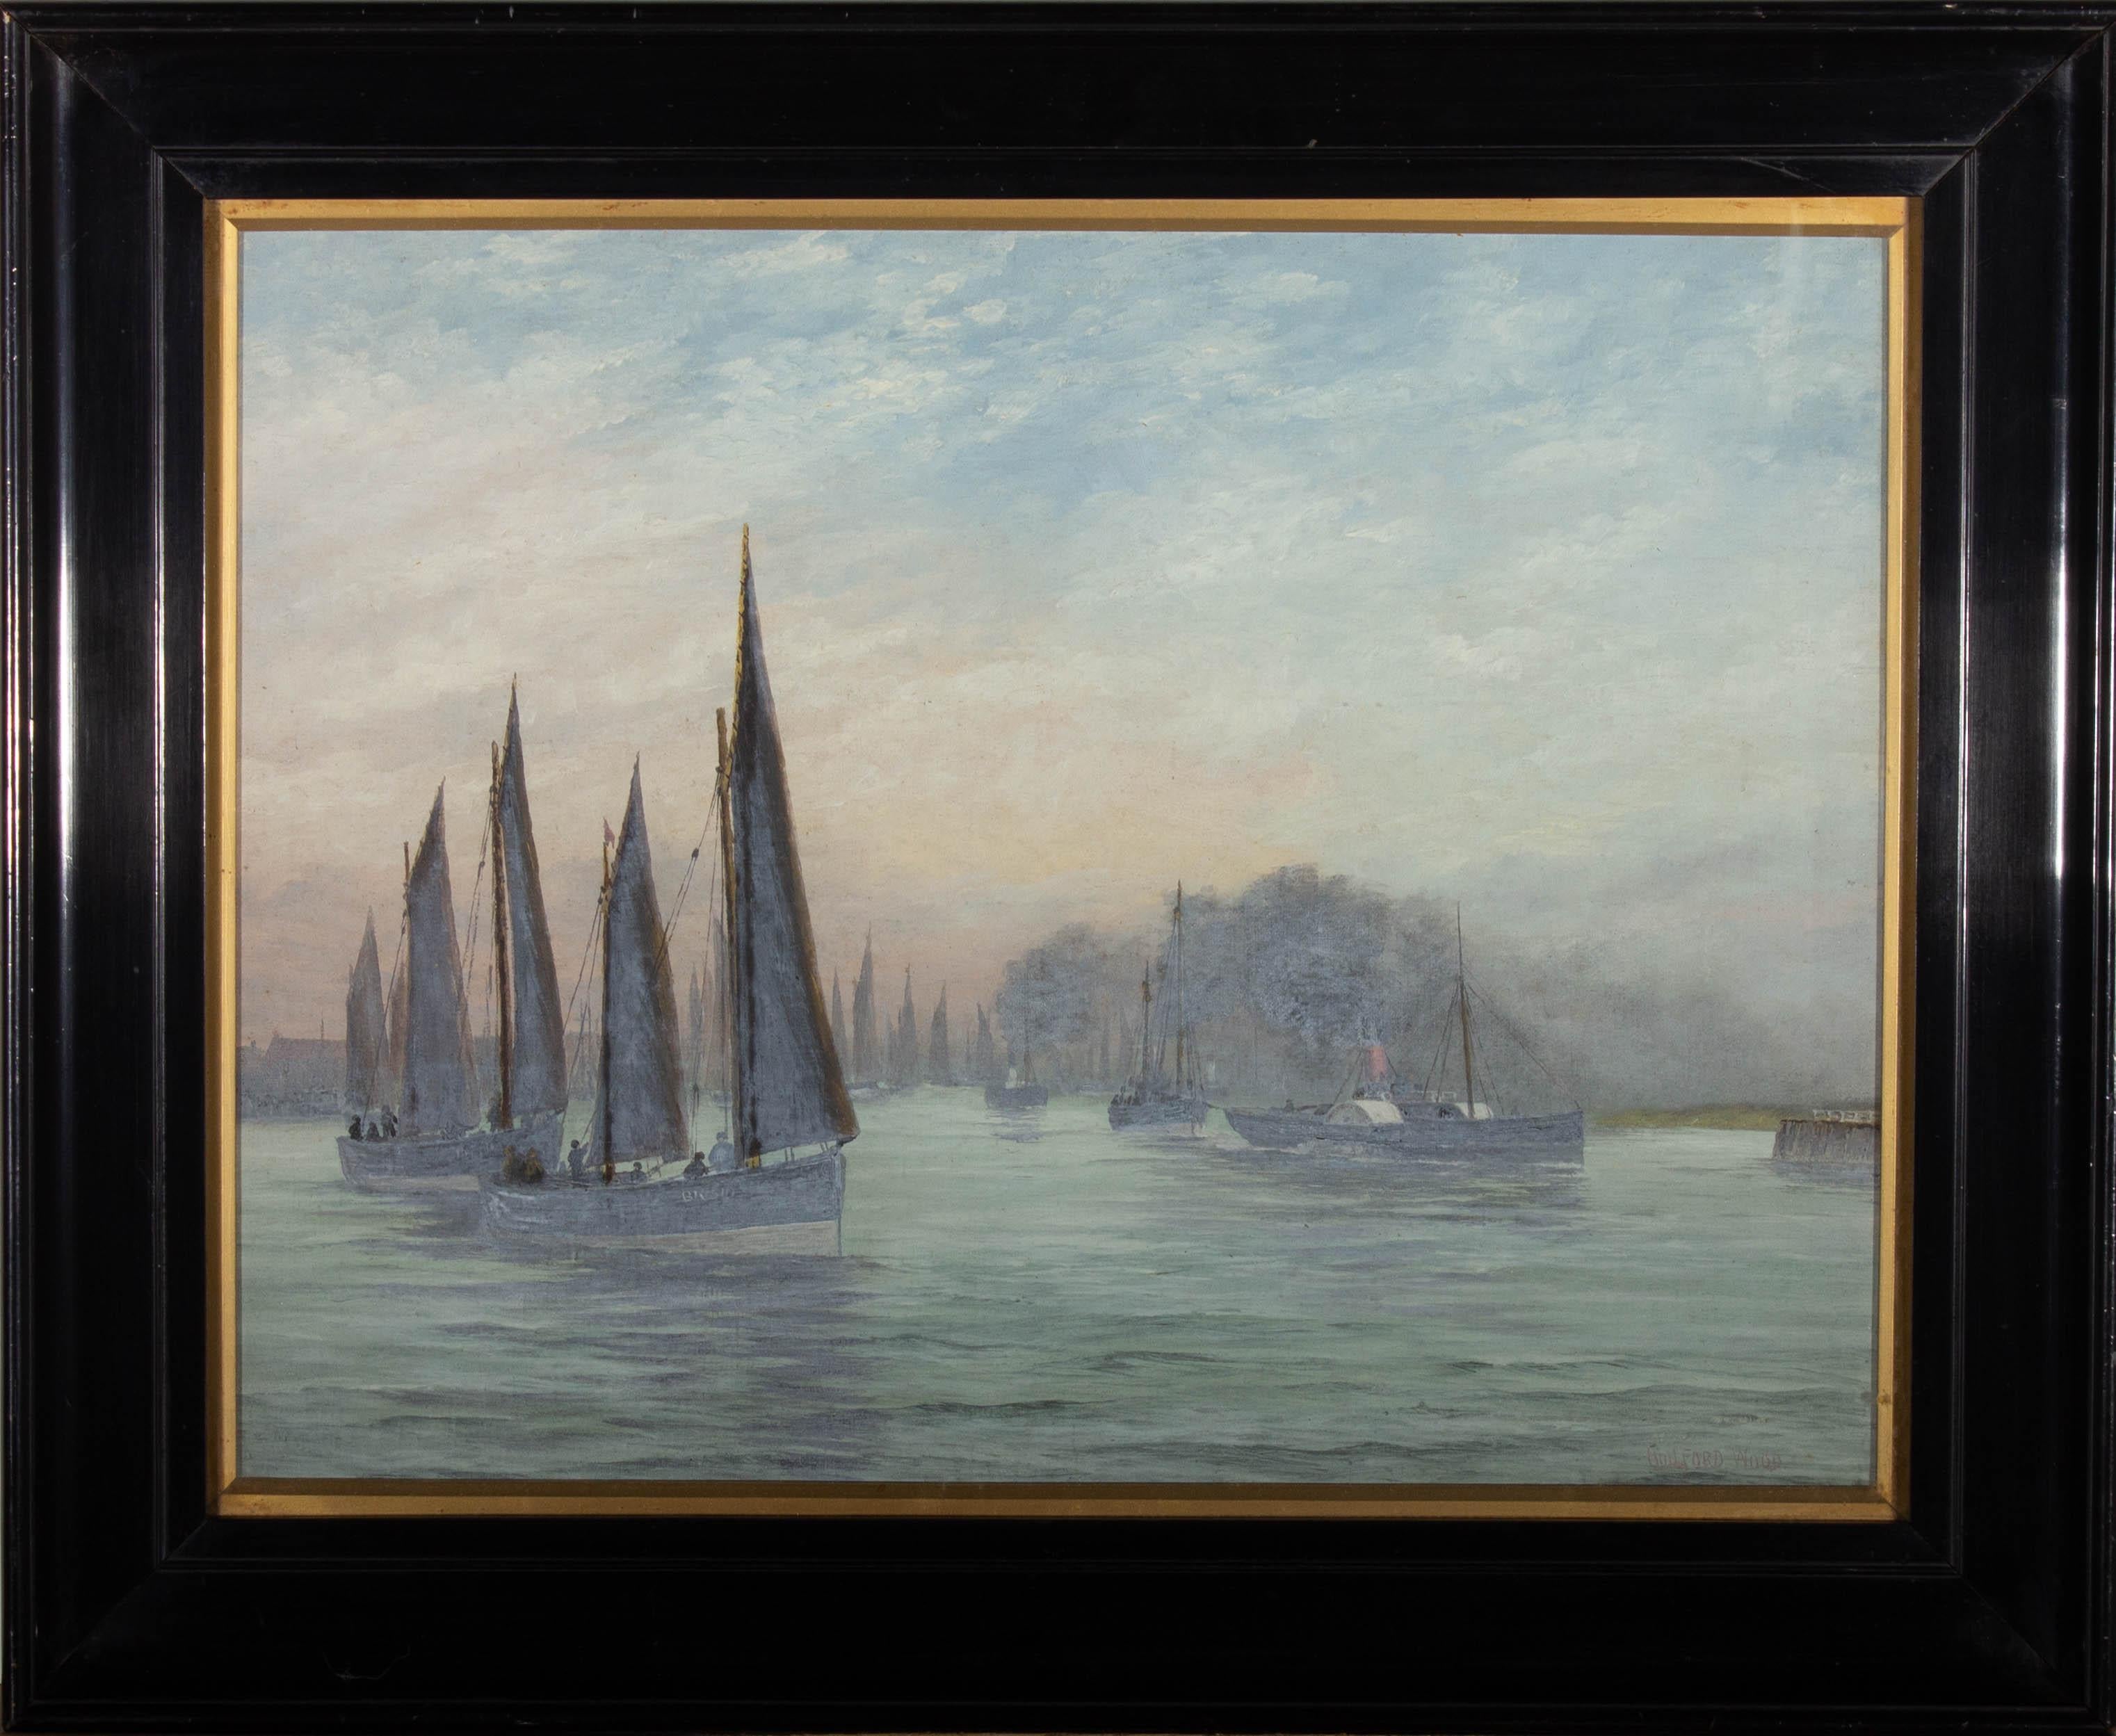 An atmospheric coastal scene depicting numerous sailing boats silhouetted against the clouds with a paddle steamer to the right of the composition. Presented in a black lacquer frame with a gilt-effect slip. Signed to the lower-right edge. On canvas